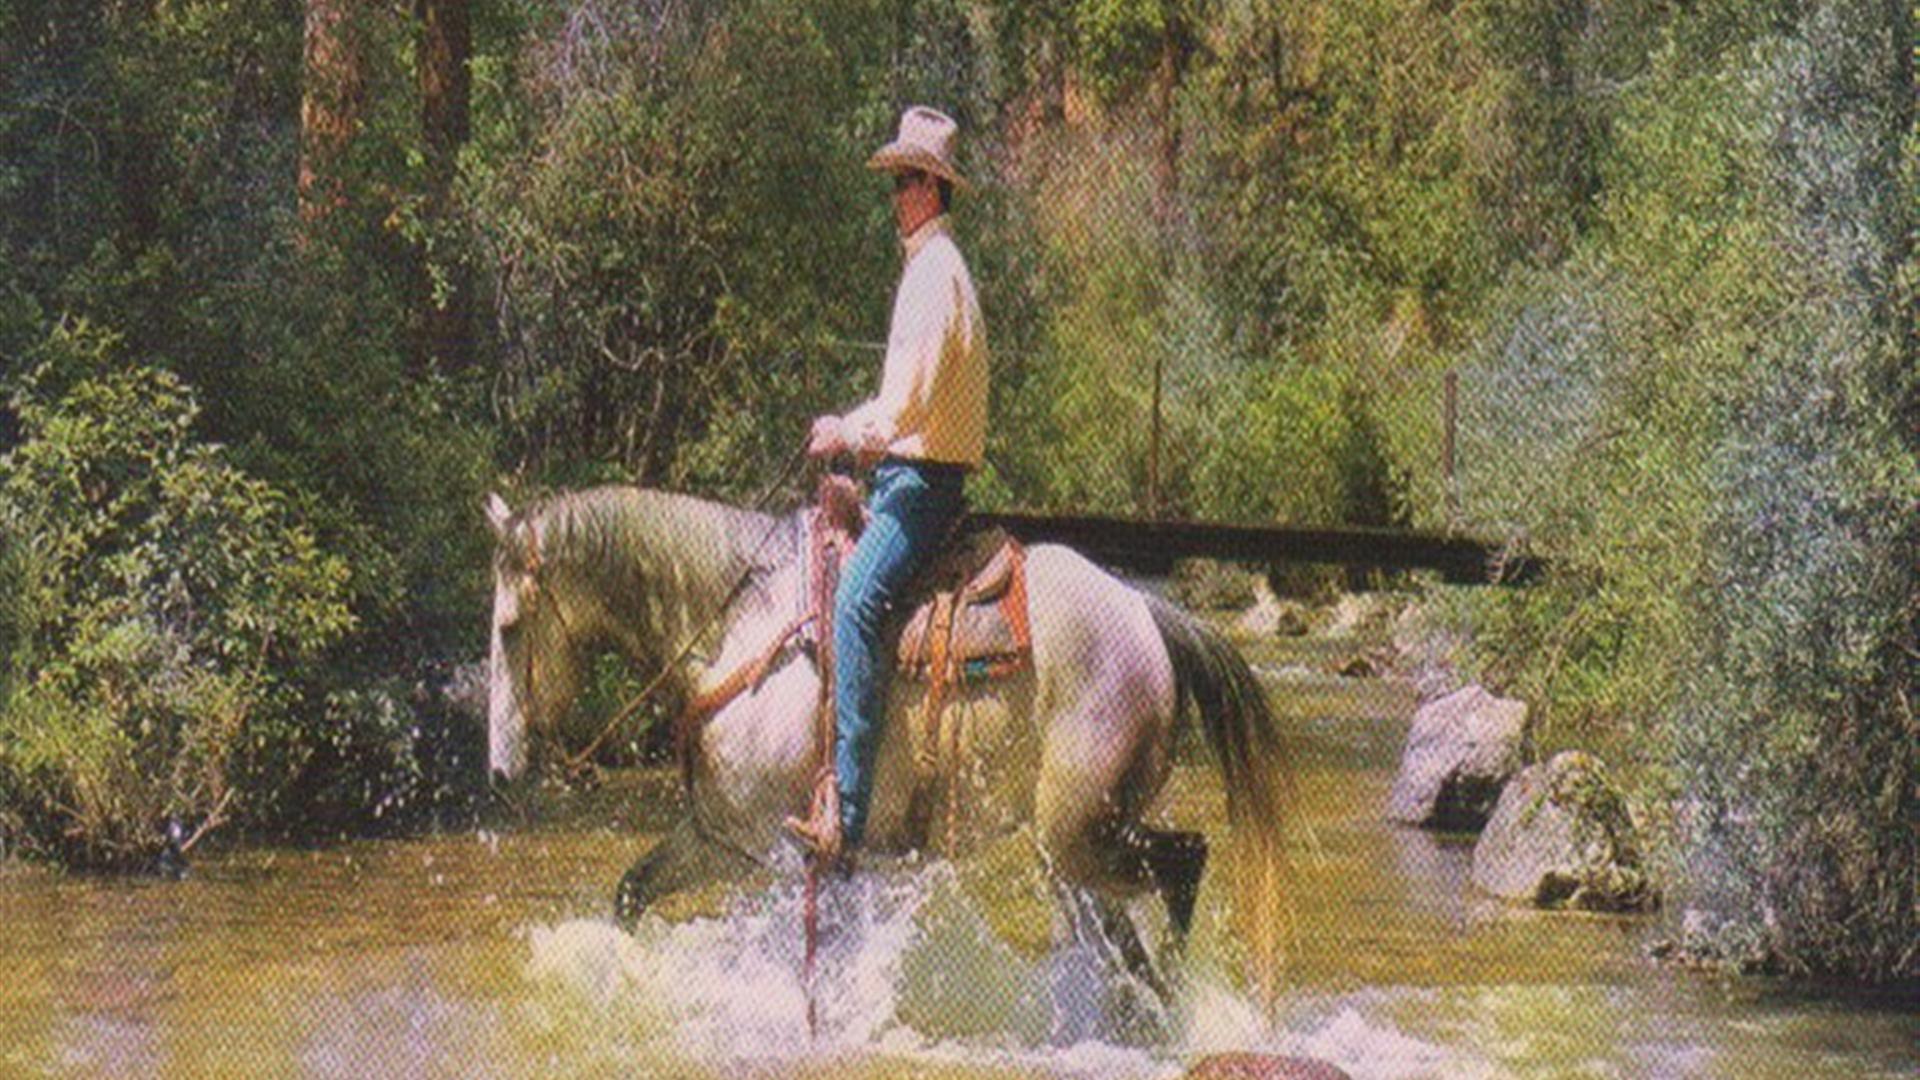 Western Style Horse Riding